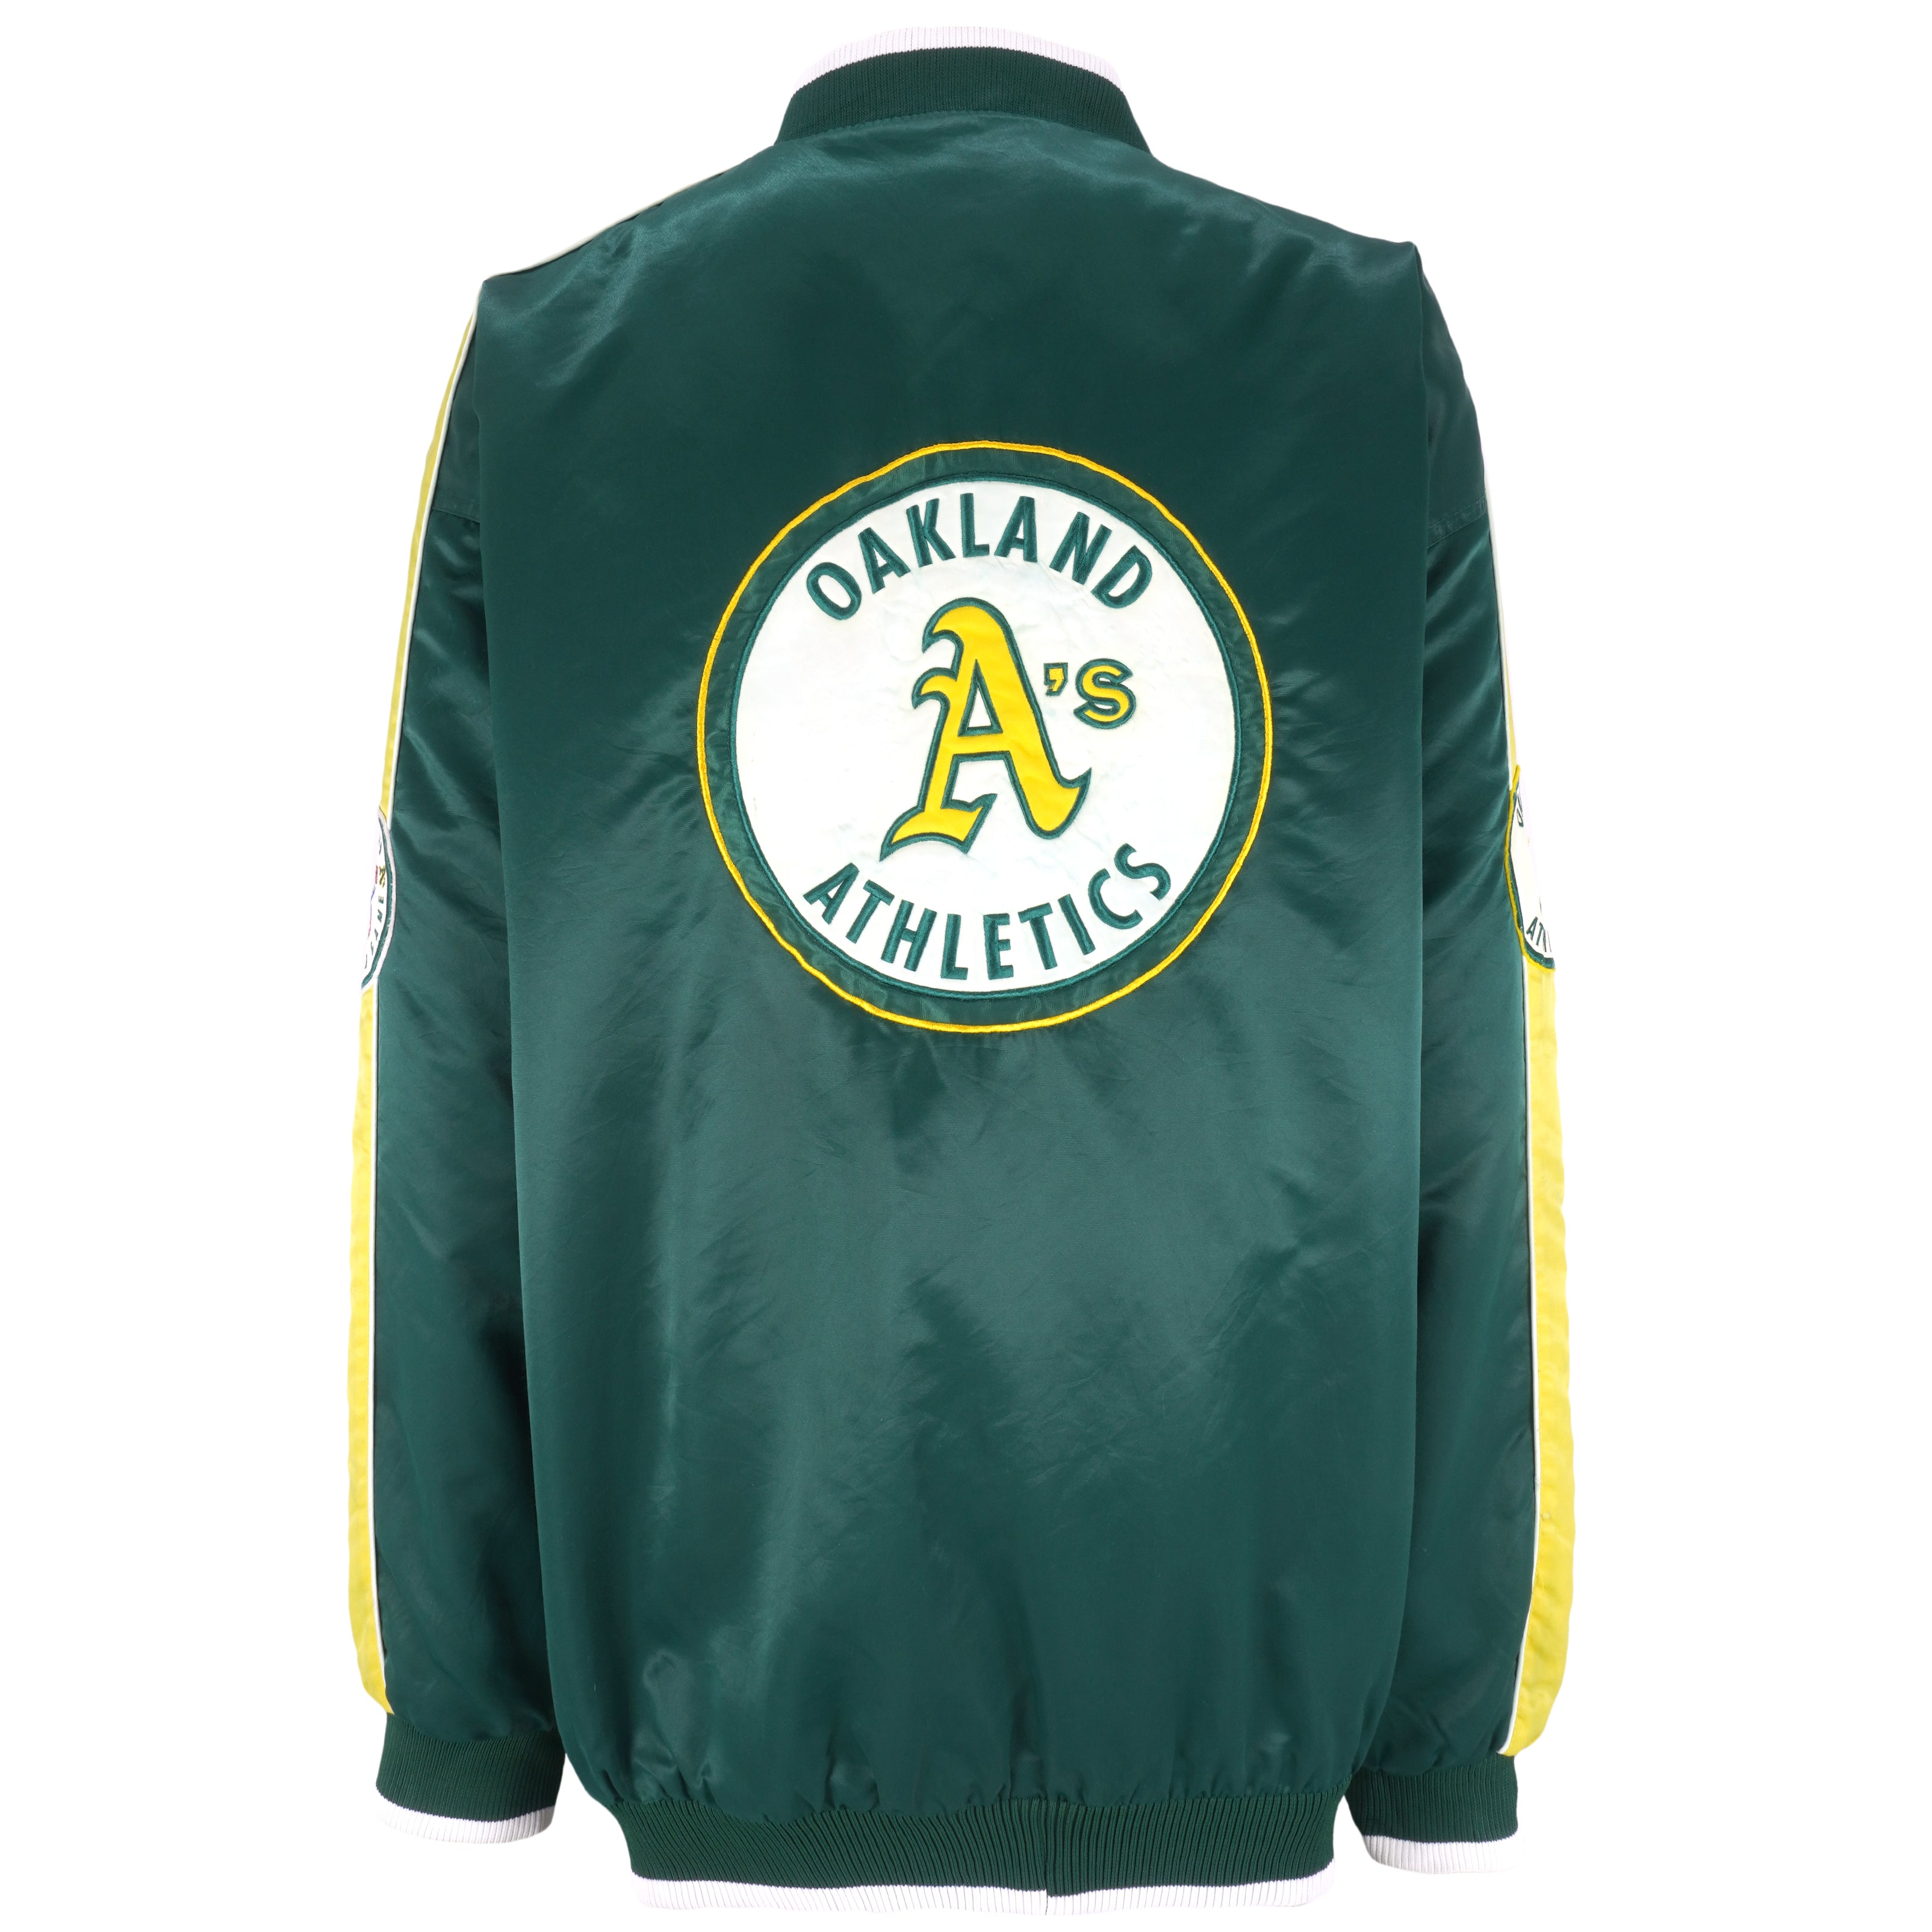 Oakland Athletics All Star Game Gear, A's All Star Game Jerseys, All